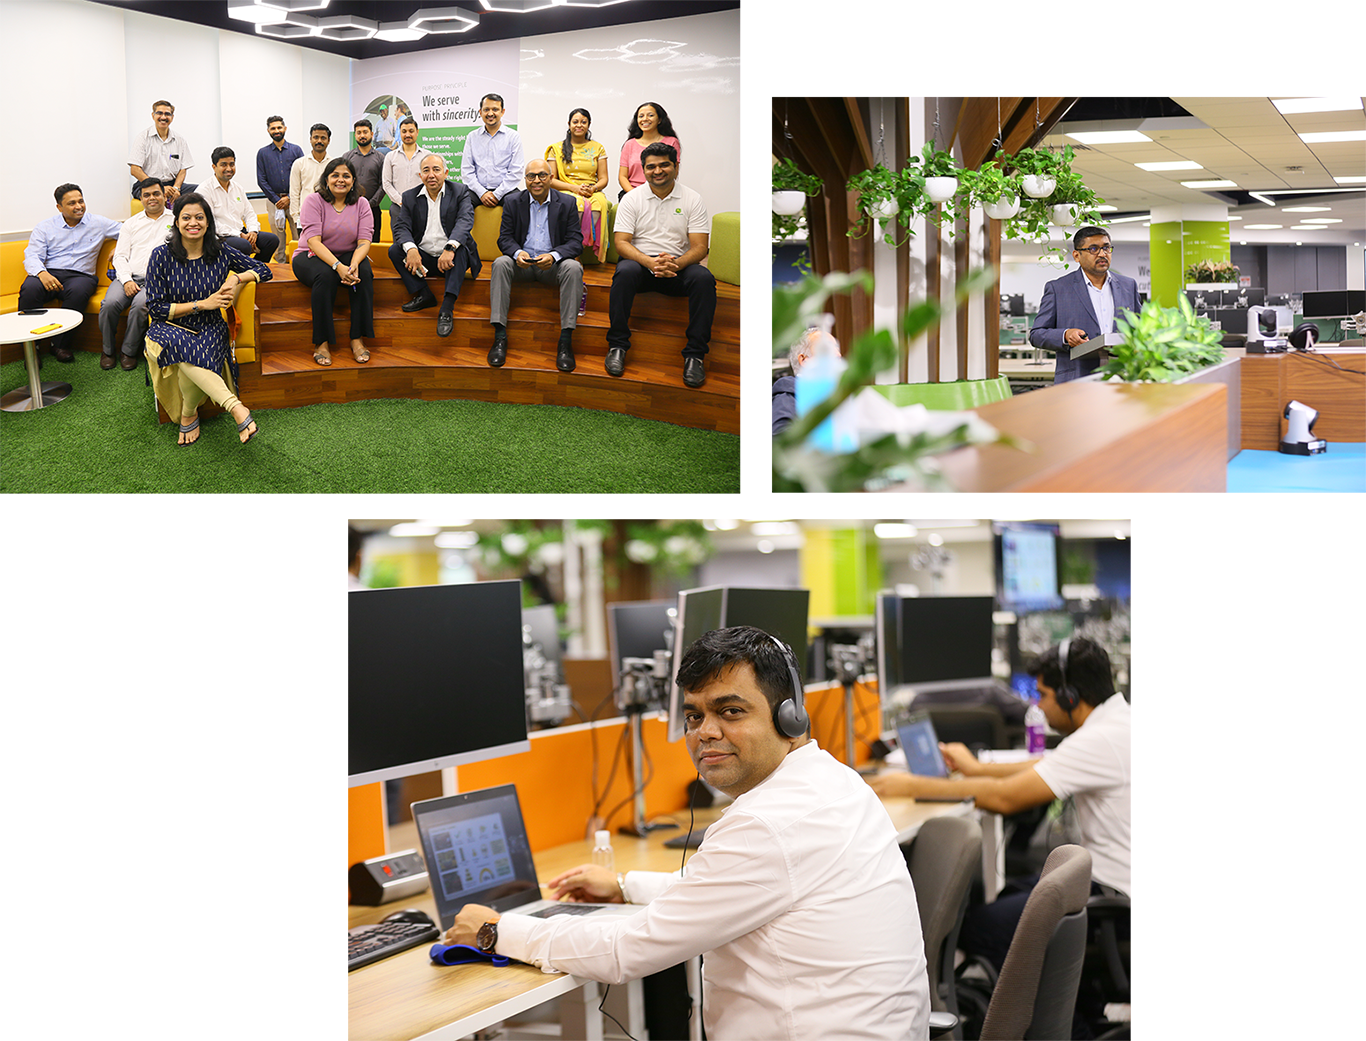 collage of employees in workspace